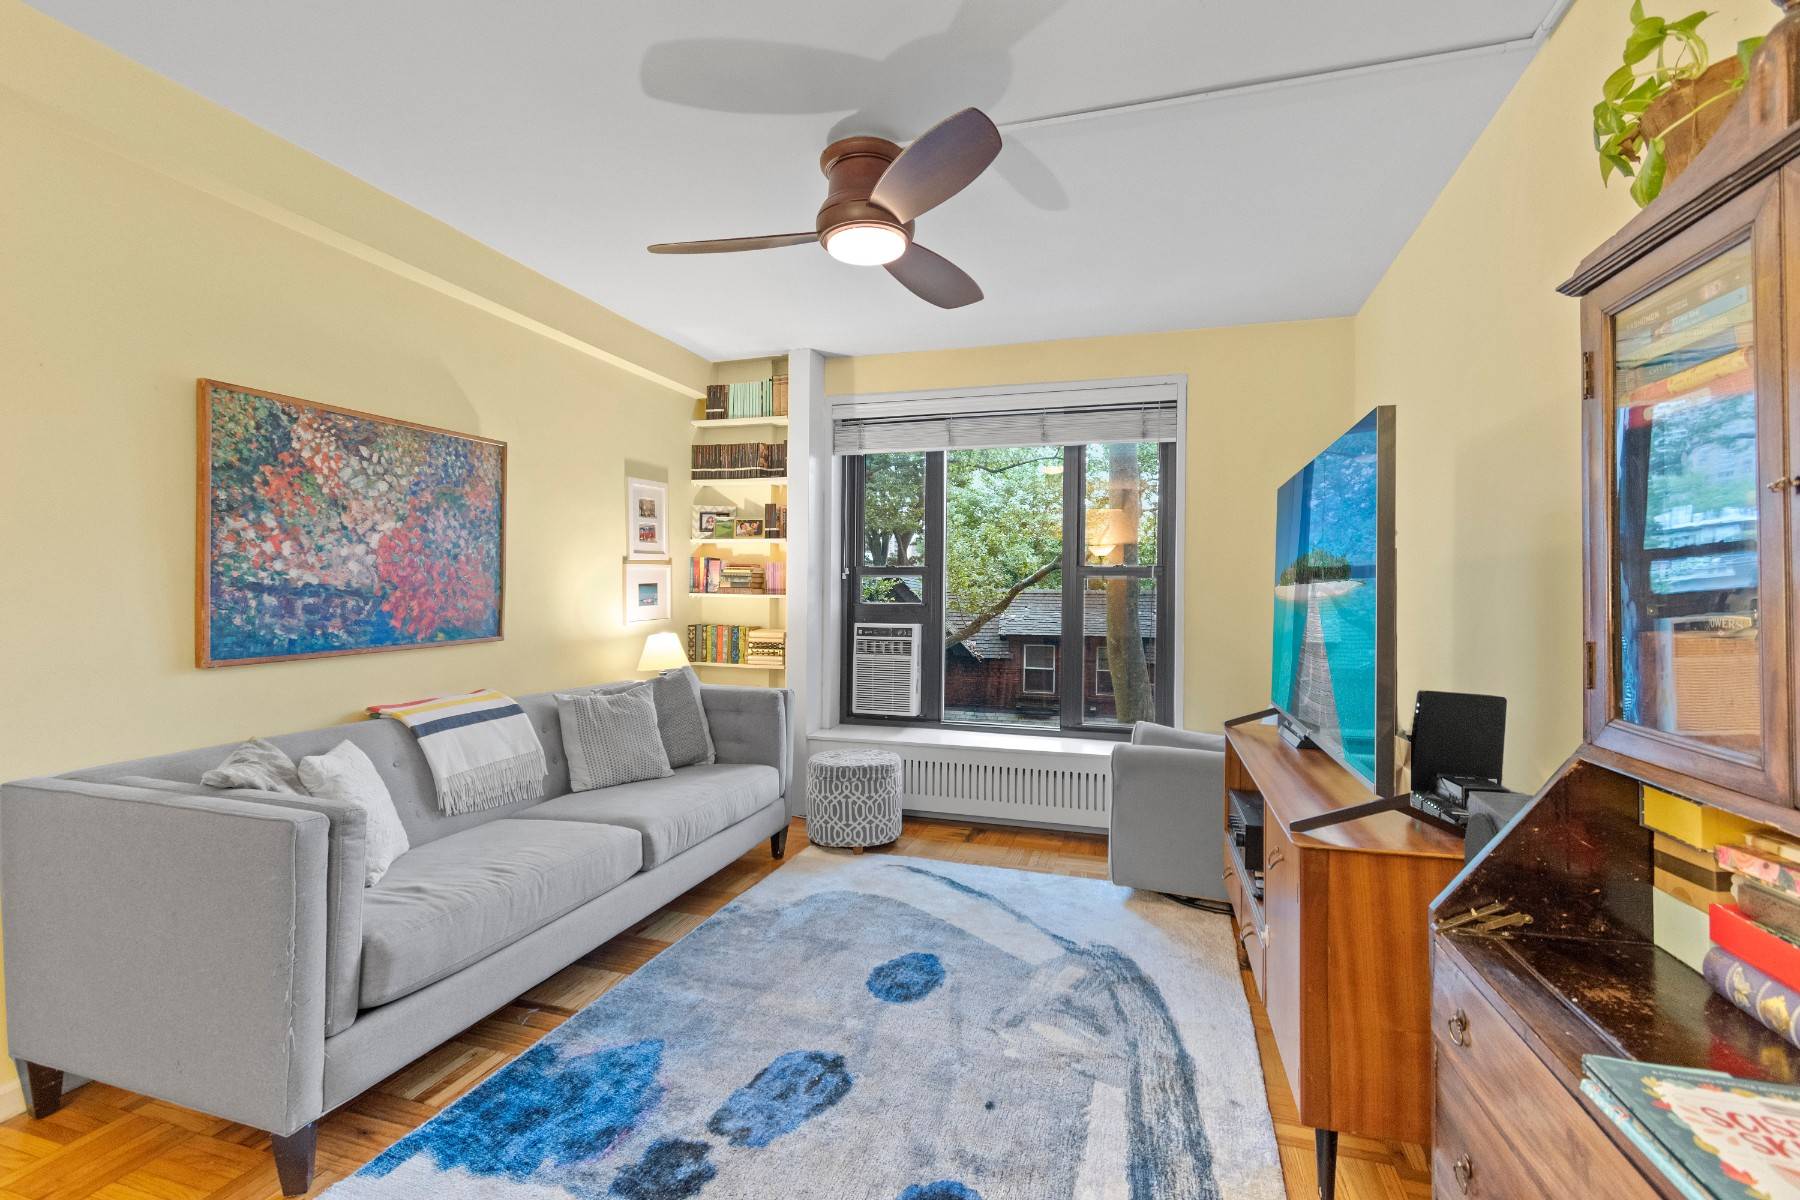 This bright, spacious home has beautiful views of carriage houses on Waverly Ave and brownstone Clinton Hill with five brand new over sized windows and two exposures.